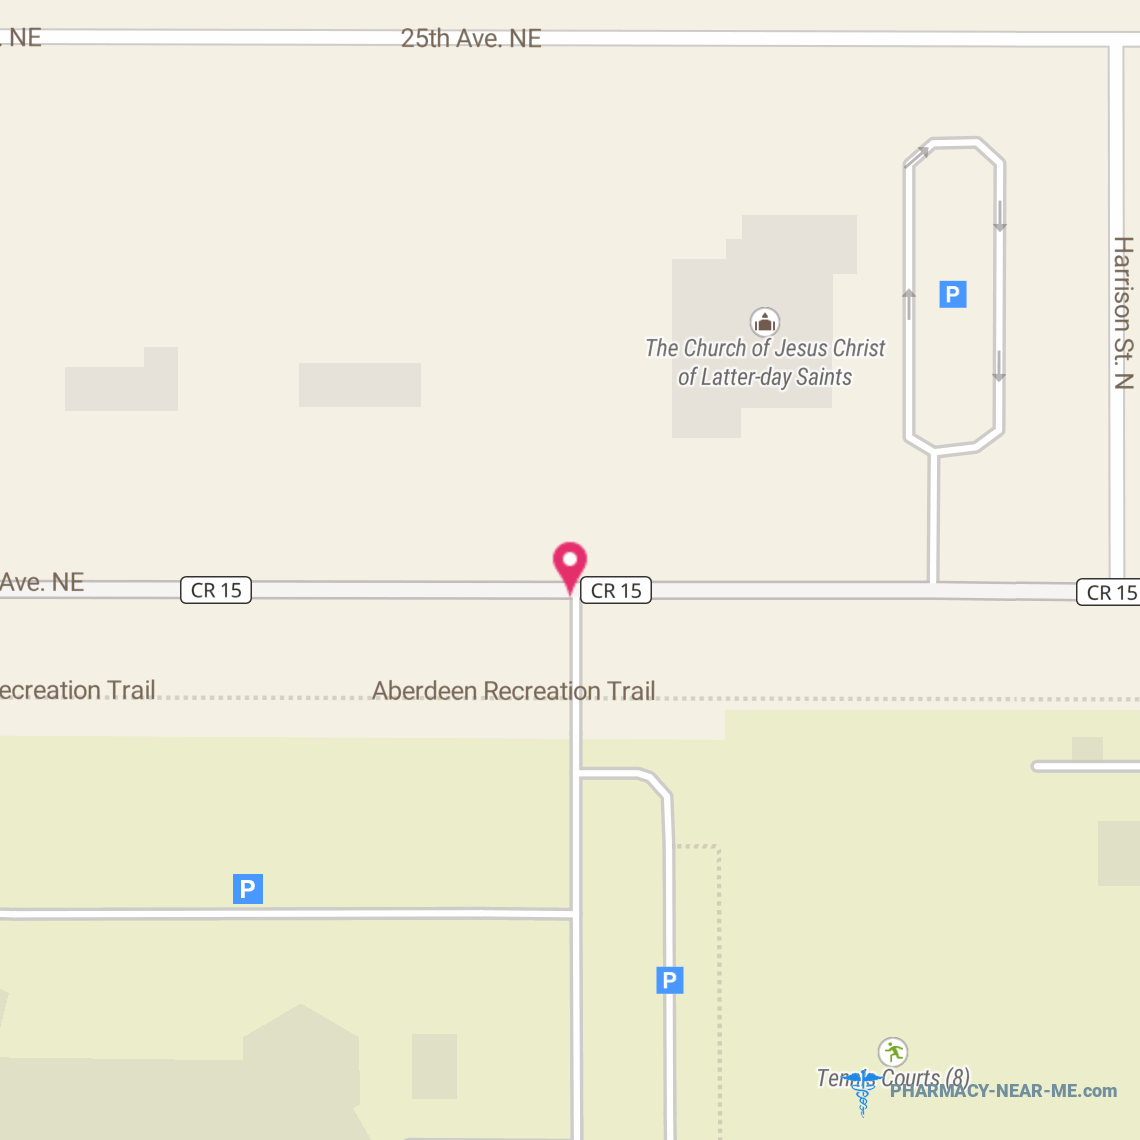 DT PHARMACY - Pharmacy Hours, Phone, Reviews & Information: 815 1st Avenue Southeast, Aberdeen, South Dakota 57401, United States